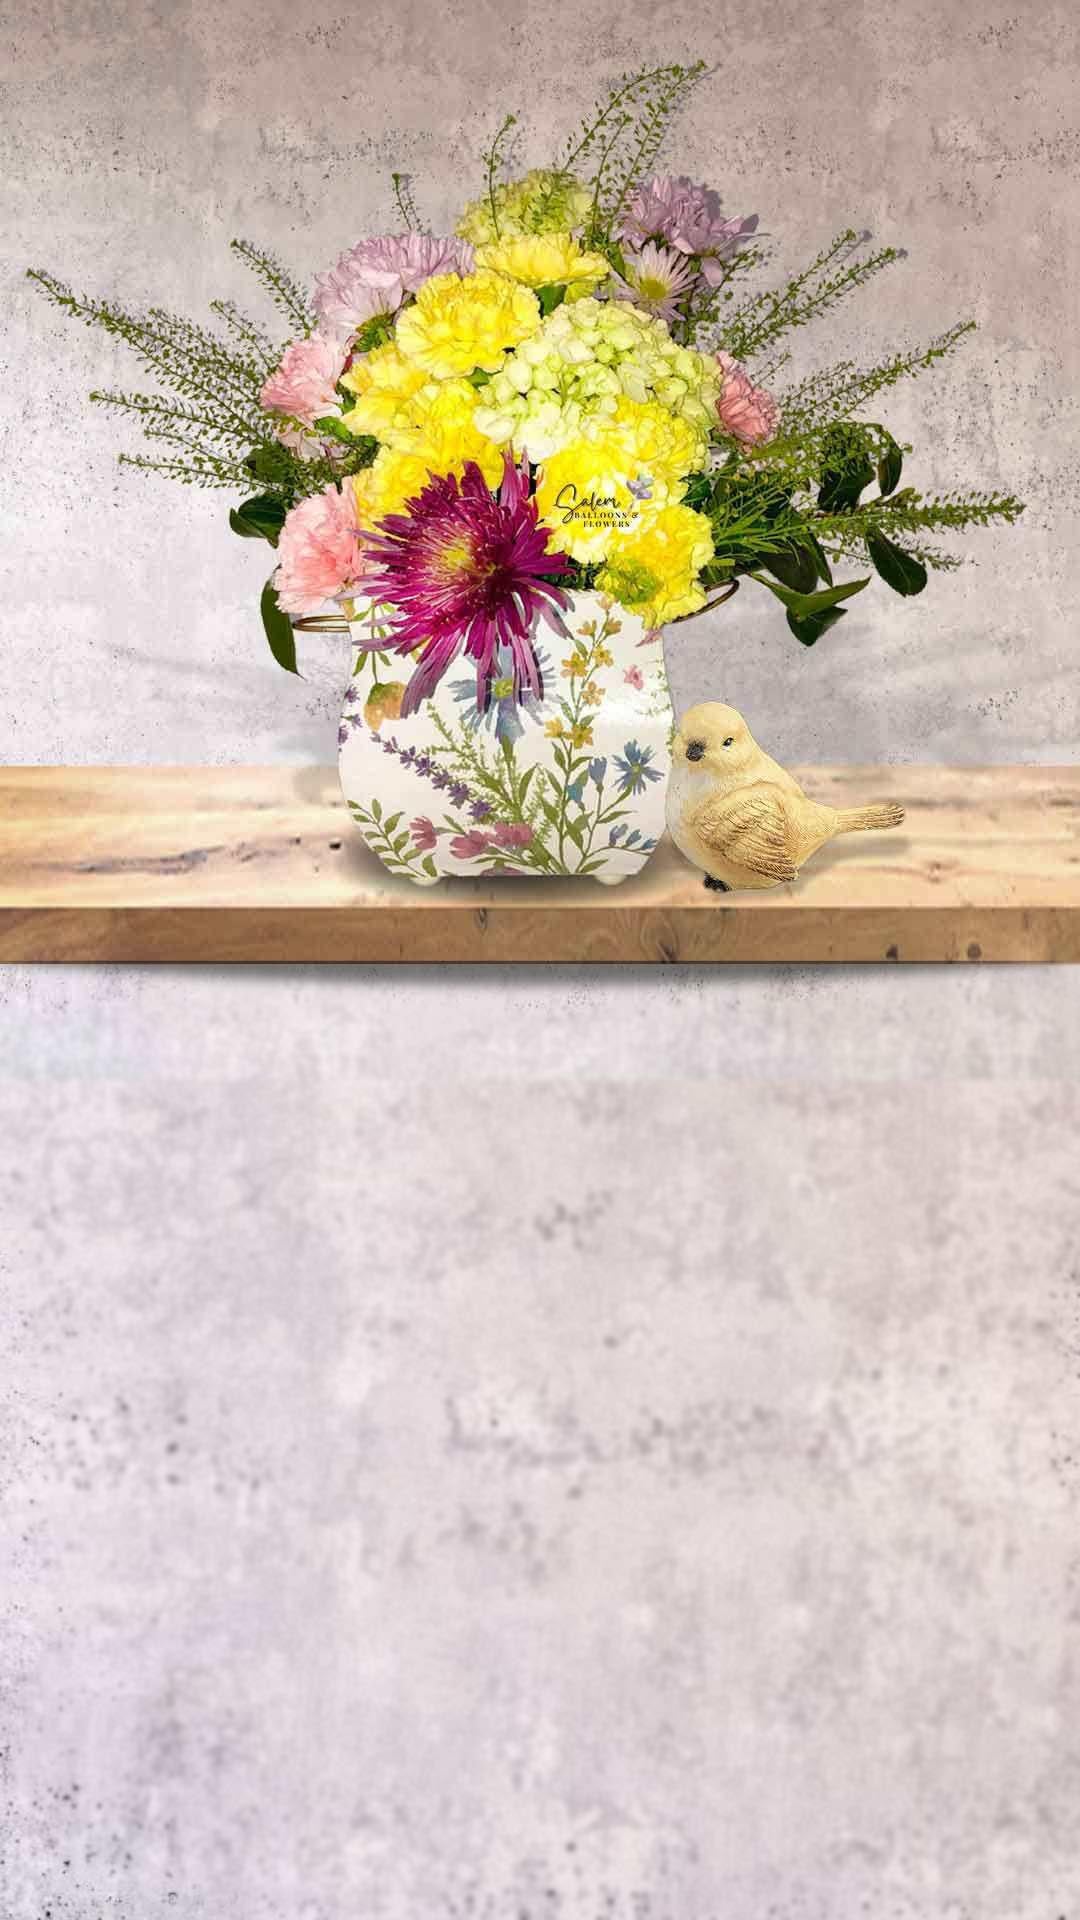 A Stunning flower arrangement in a pastel colors square vase with silvester flowers printed and a cute yellow bird standing next to it. Salem Oregon Flower delivery